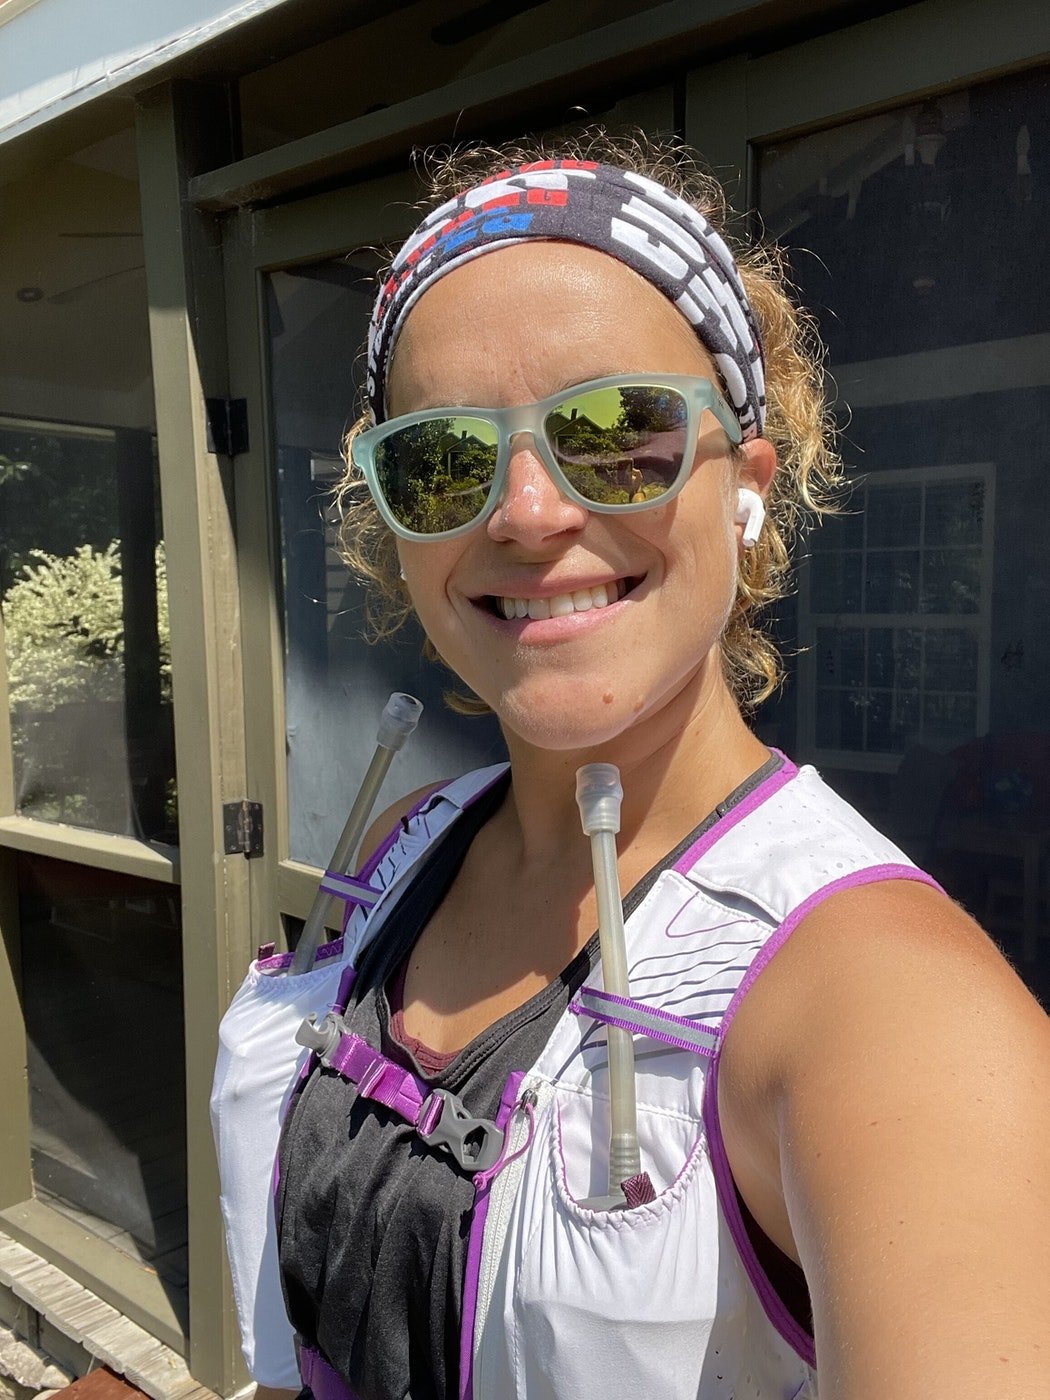 The Best Hydration Vests For women to Wear On The Run That Don't Chafe —  Badass Lady Gang